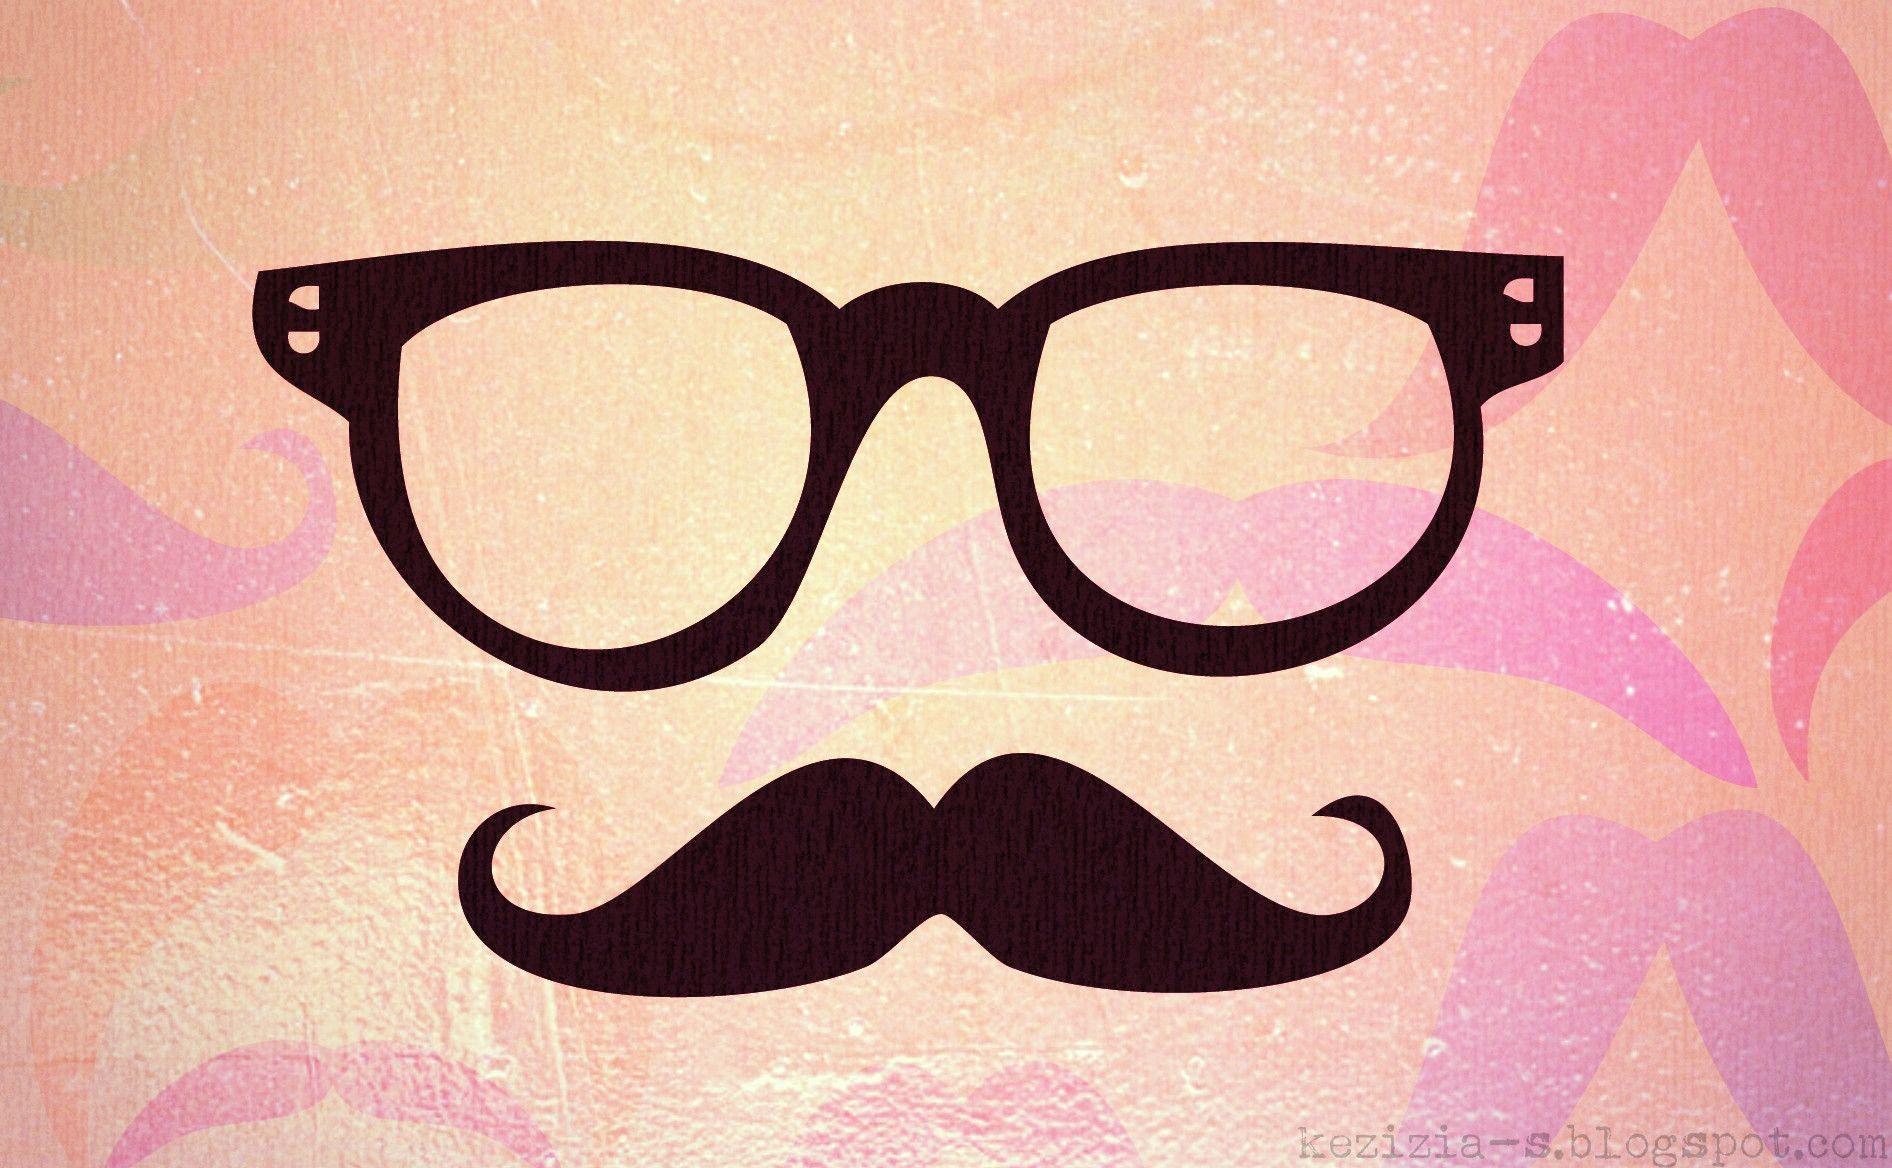 Funny : Cute Wallpapers Tumblr Mustache High Definition Wallpapers